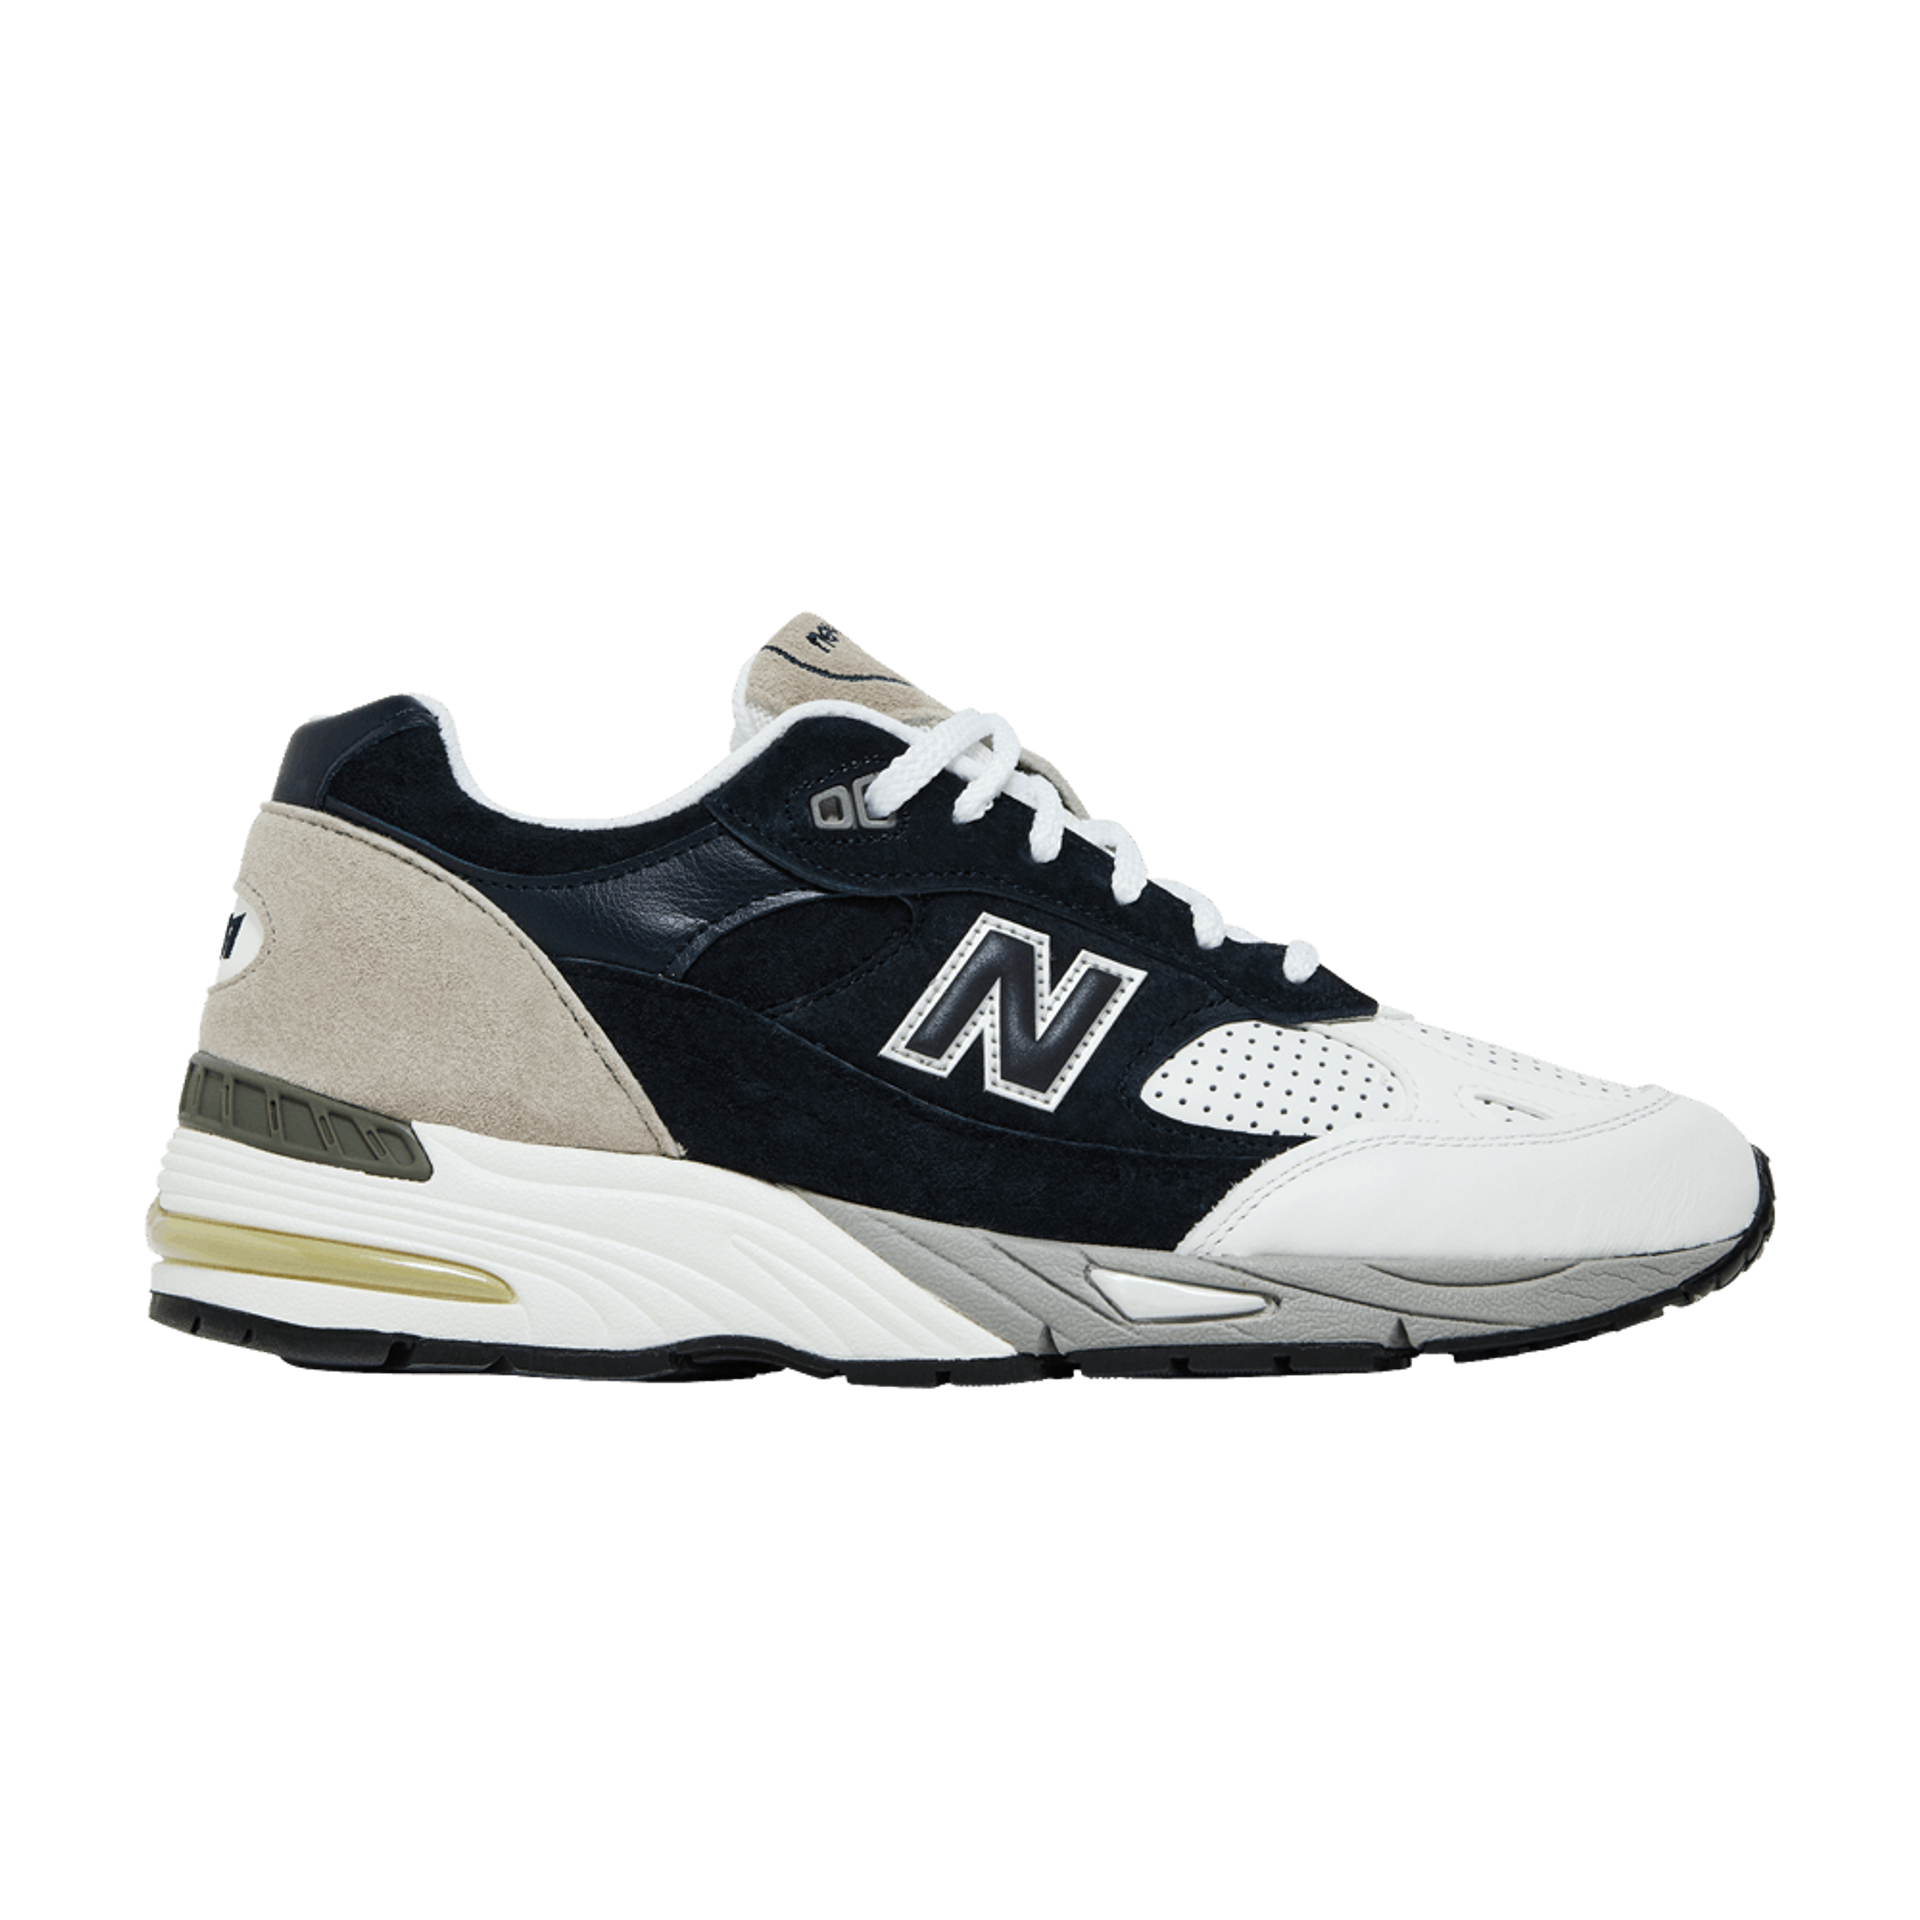 New Balance Sneakersnstuff x 991 'Perforated Pack - Navy White'